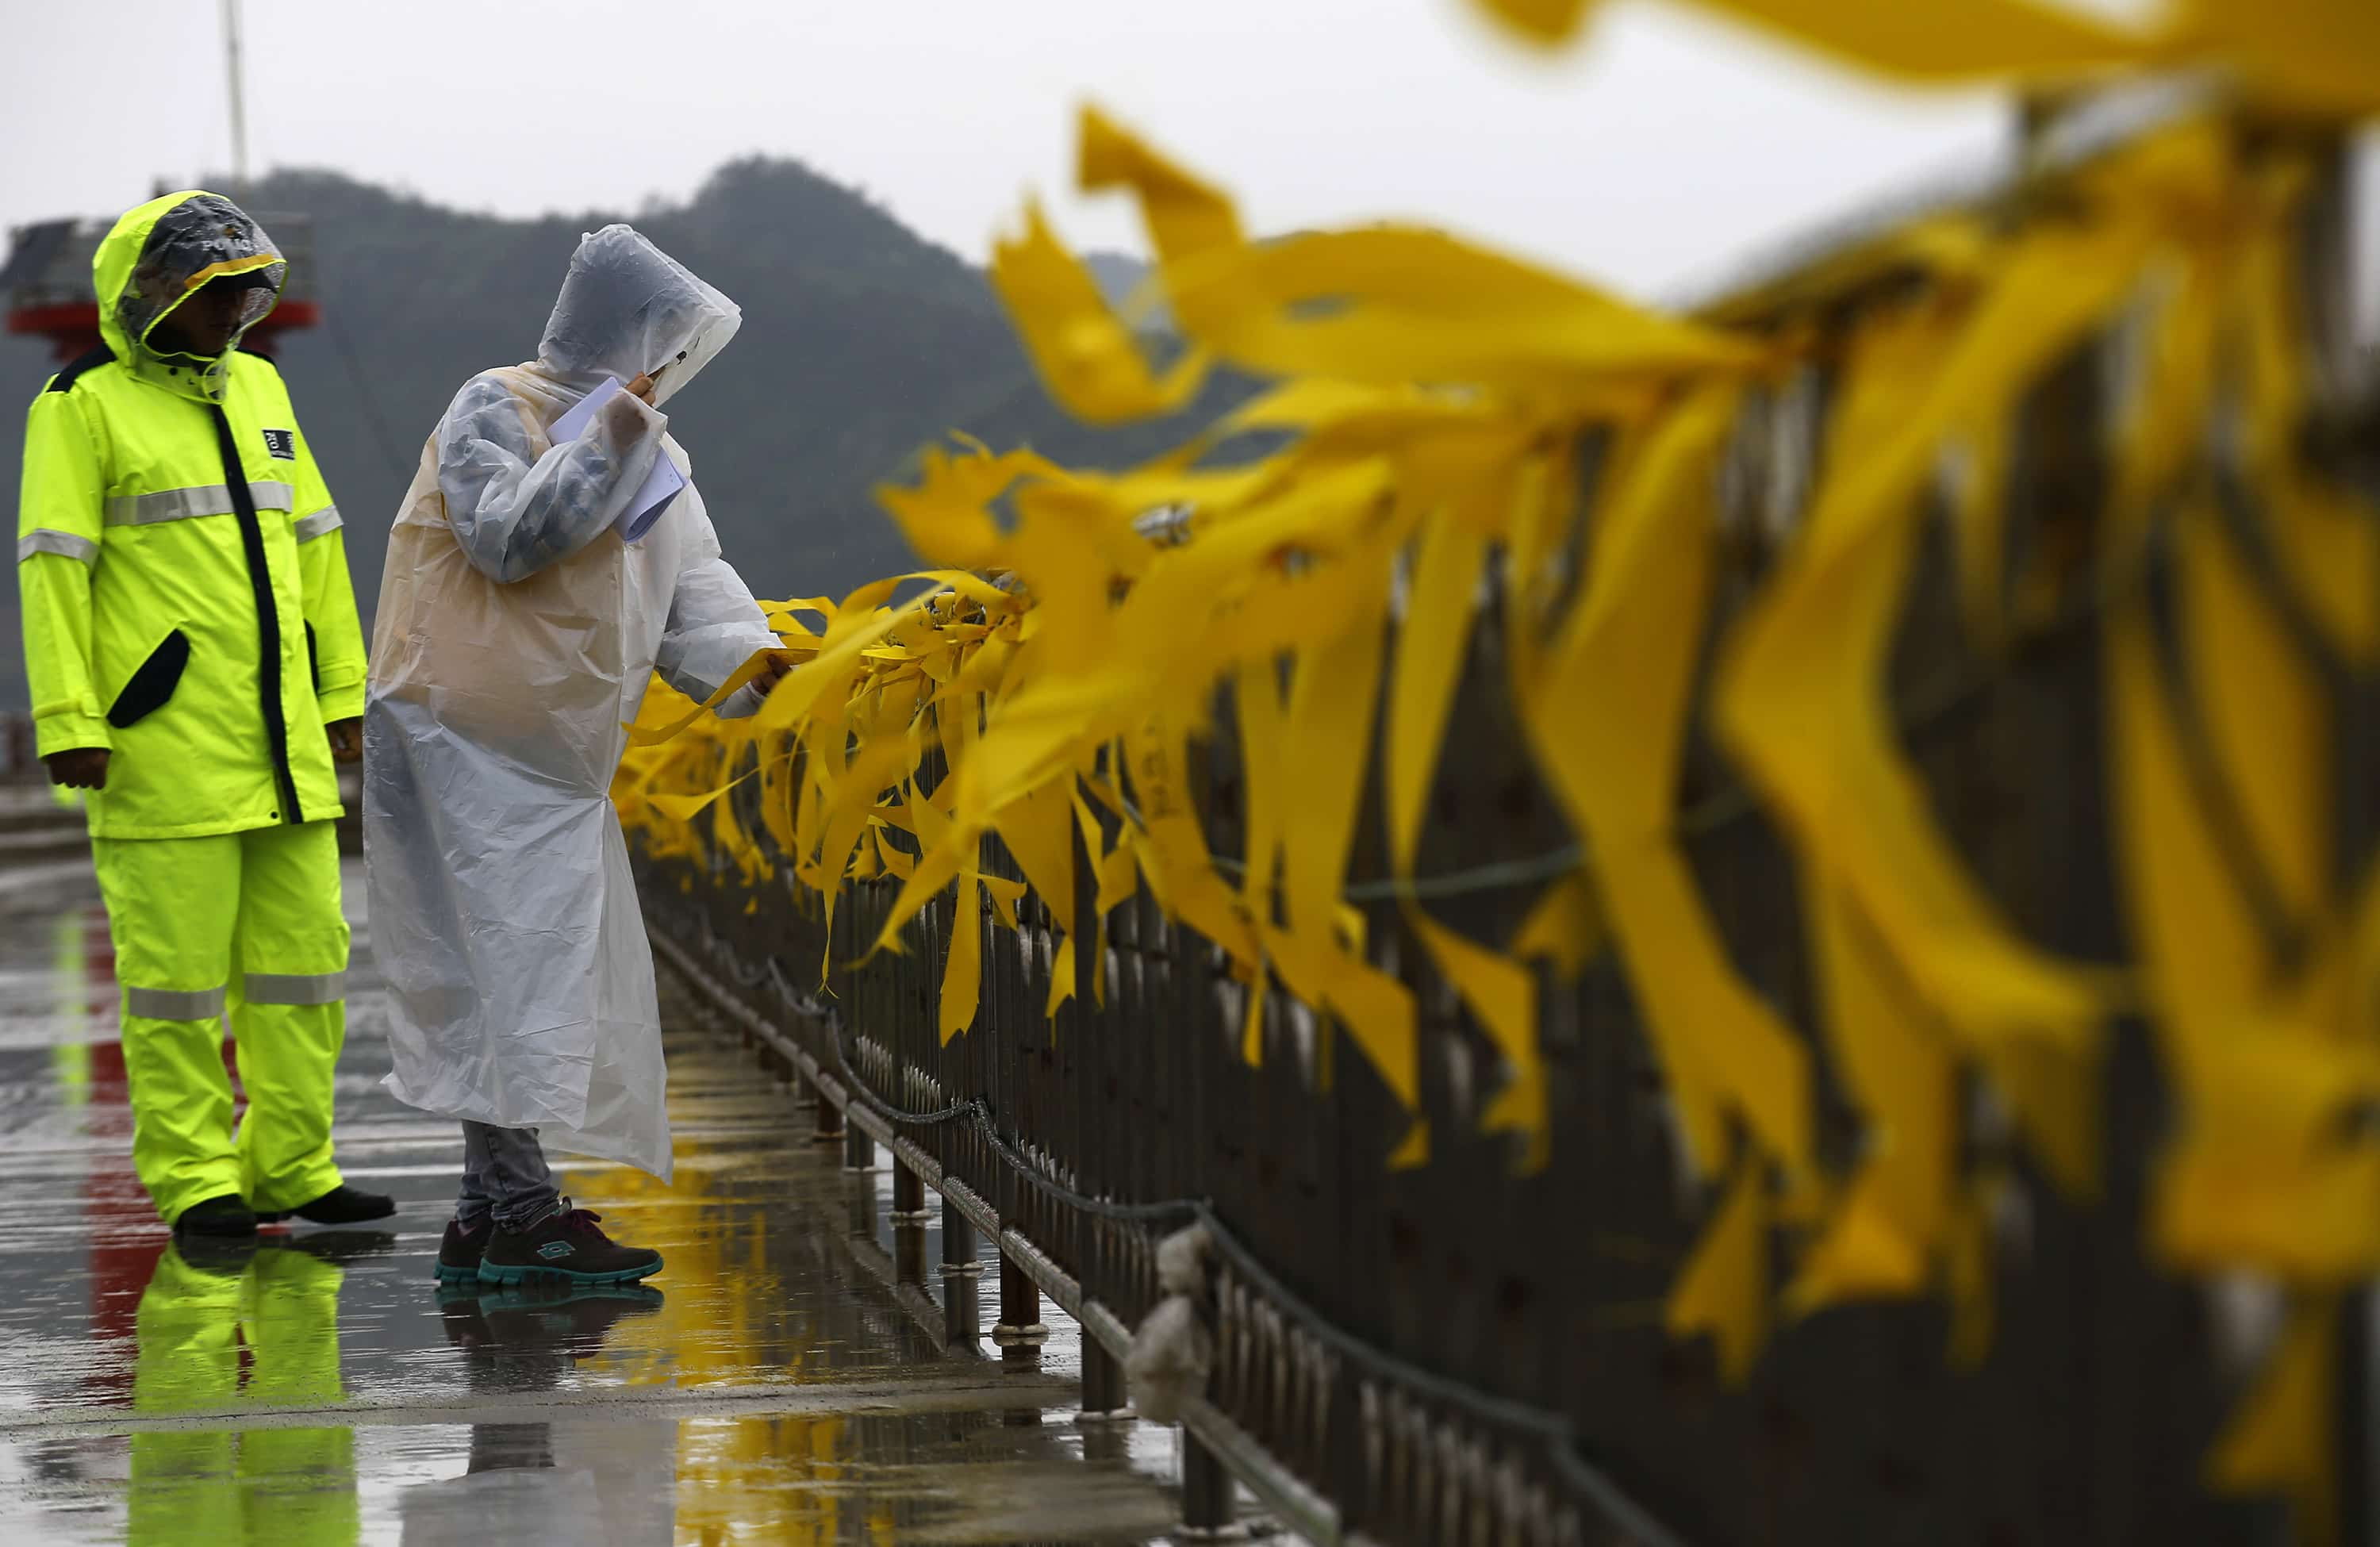 A volunteer, assisting family members of missing passengers onboard the capsized Sewol ferry, looks at yellow ribbons dedicated to victims of the disaster in Jindo, 27 April 2014, REUTERS/Kim Kyung-Hoon